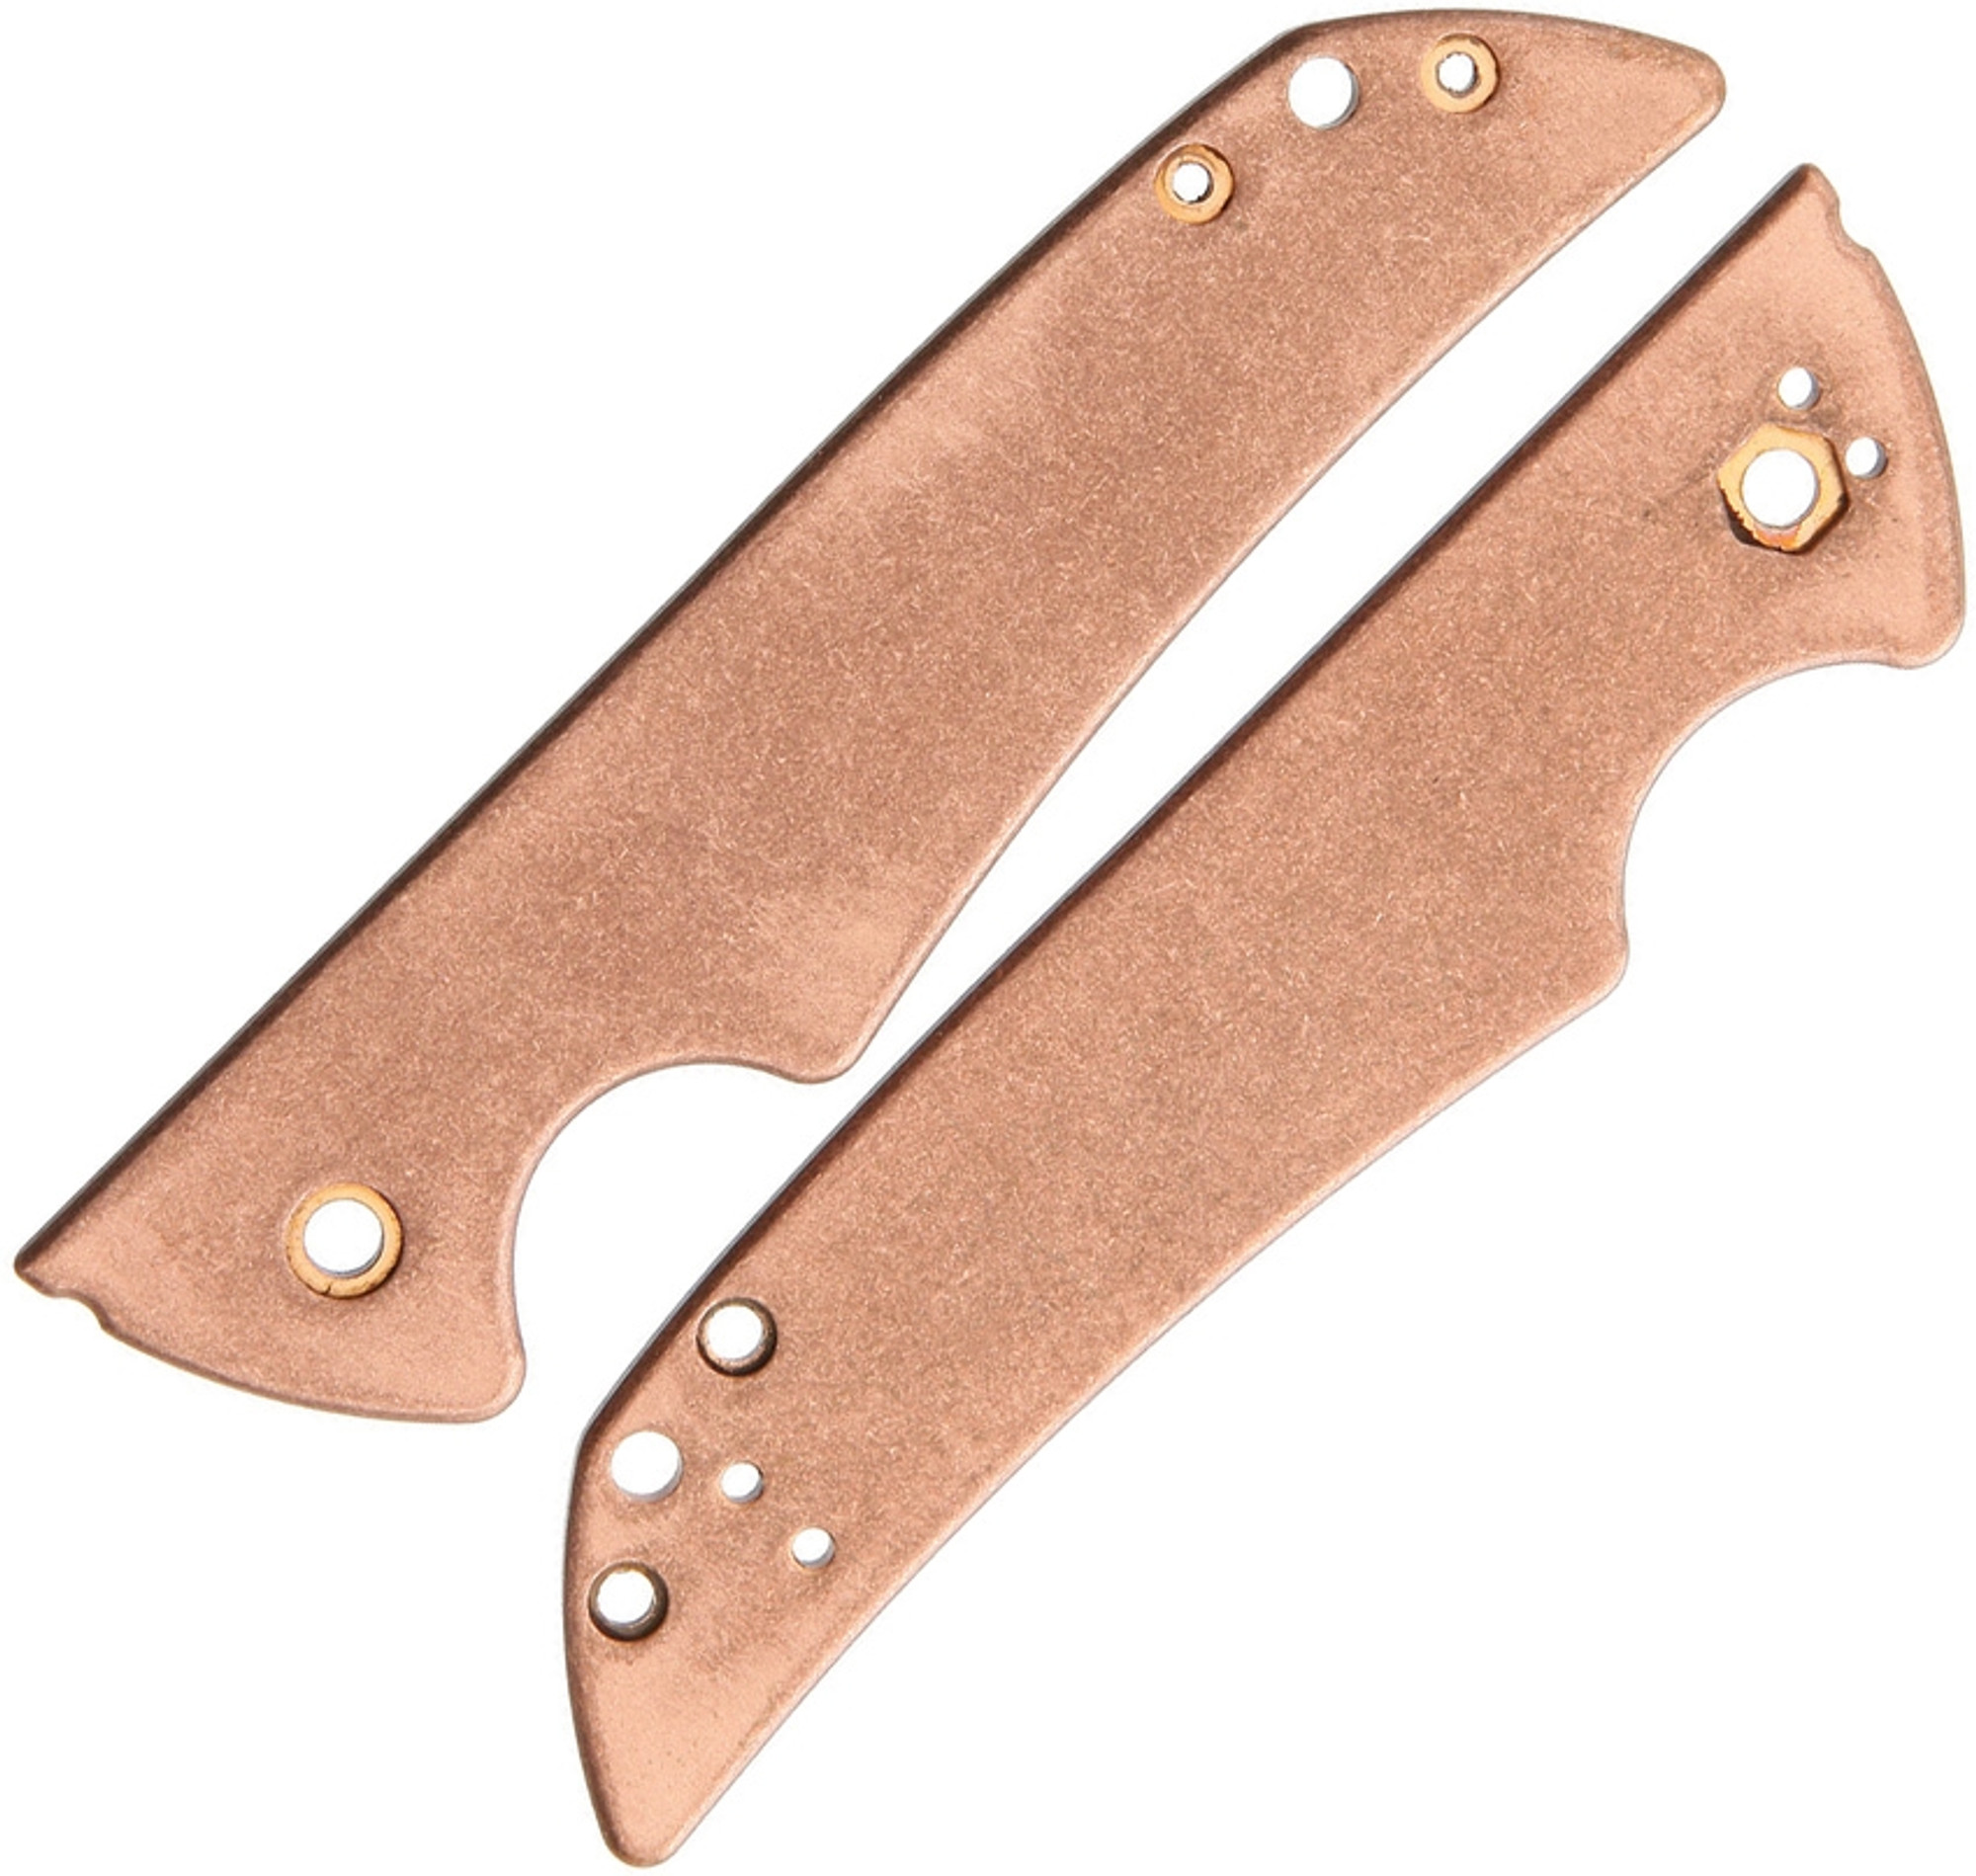 Kershaw Skyline Scales Copper FLY561